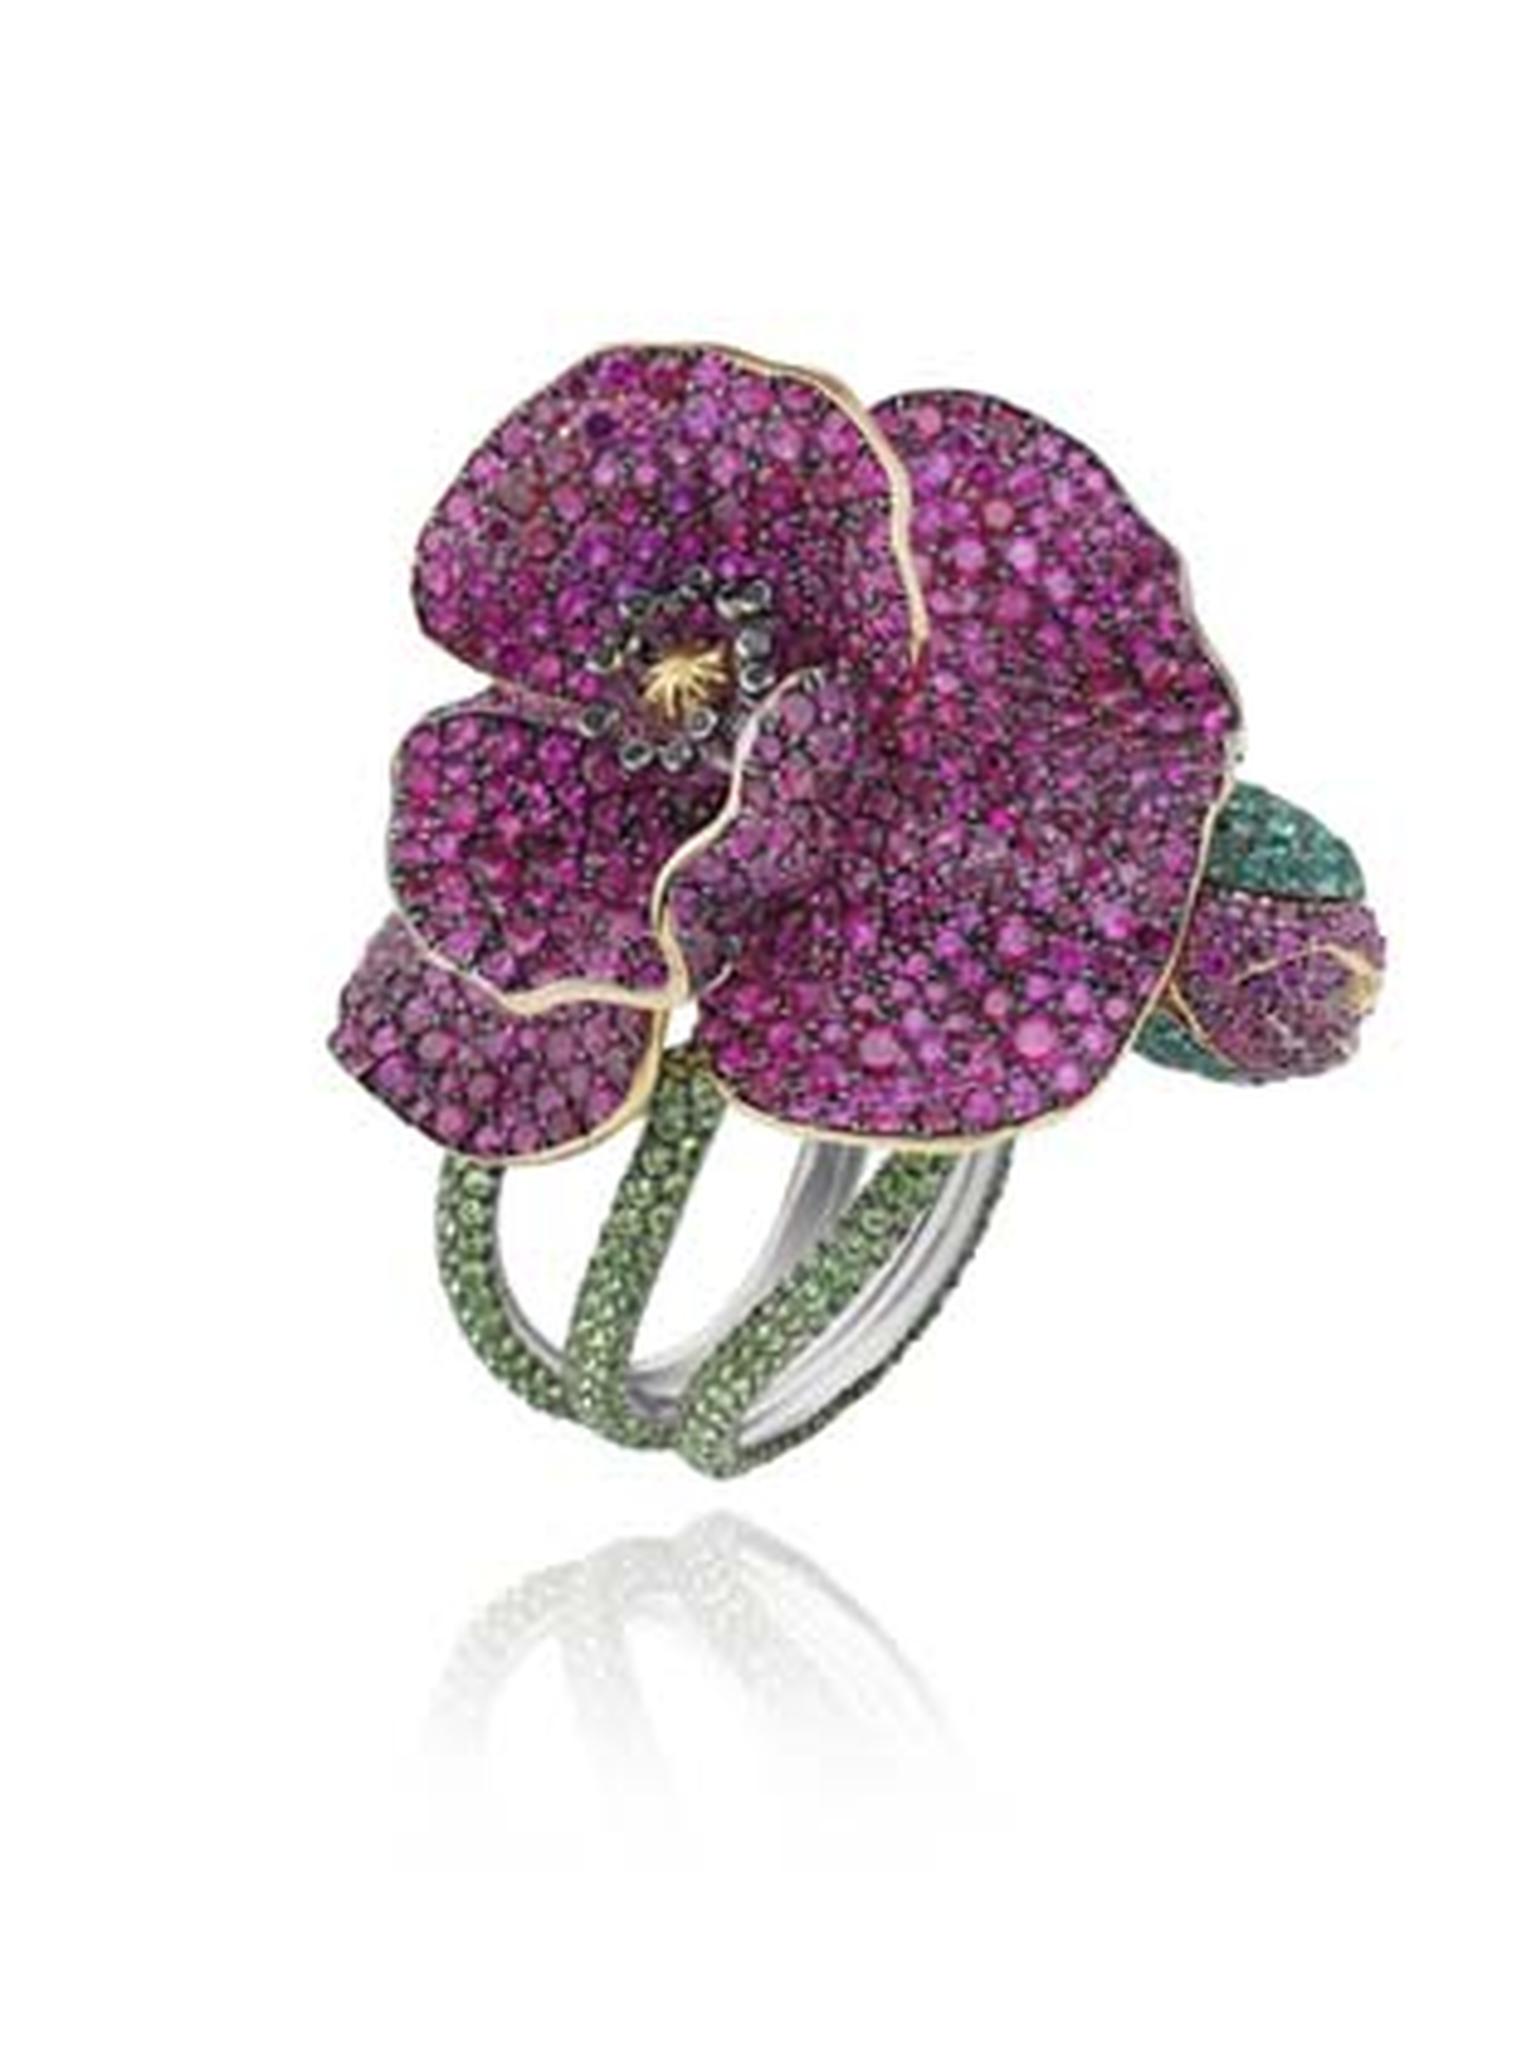 829236-9001 Poppy Ring  from the Red Carpet Collection 2013 white.jpg